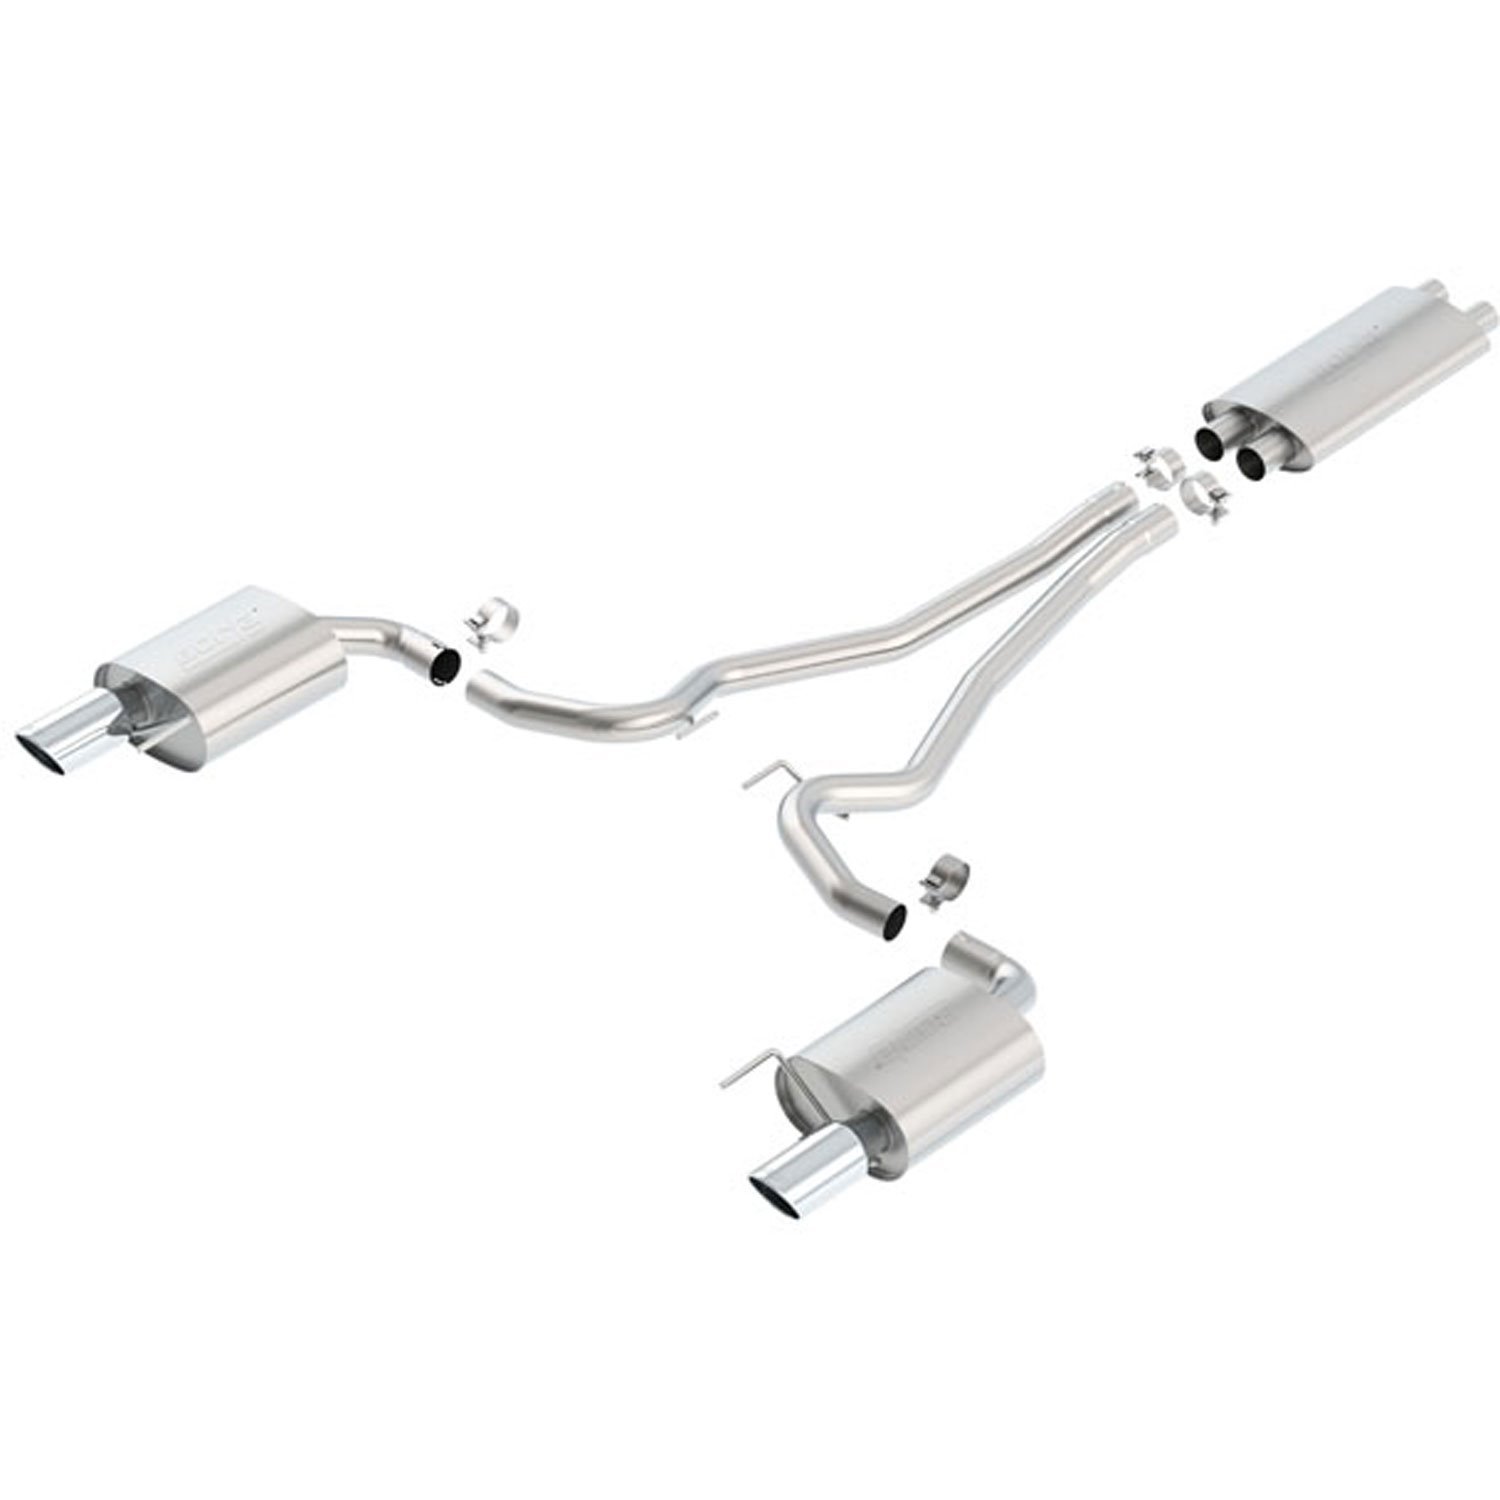 Cat-Back Exhaust System 2015-2017 Mustang GT 5.0L